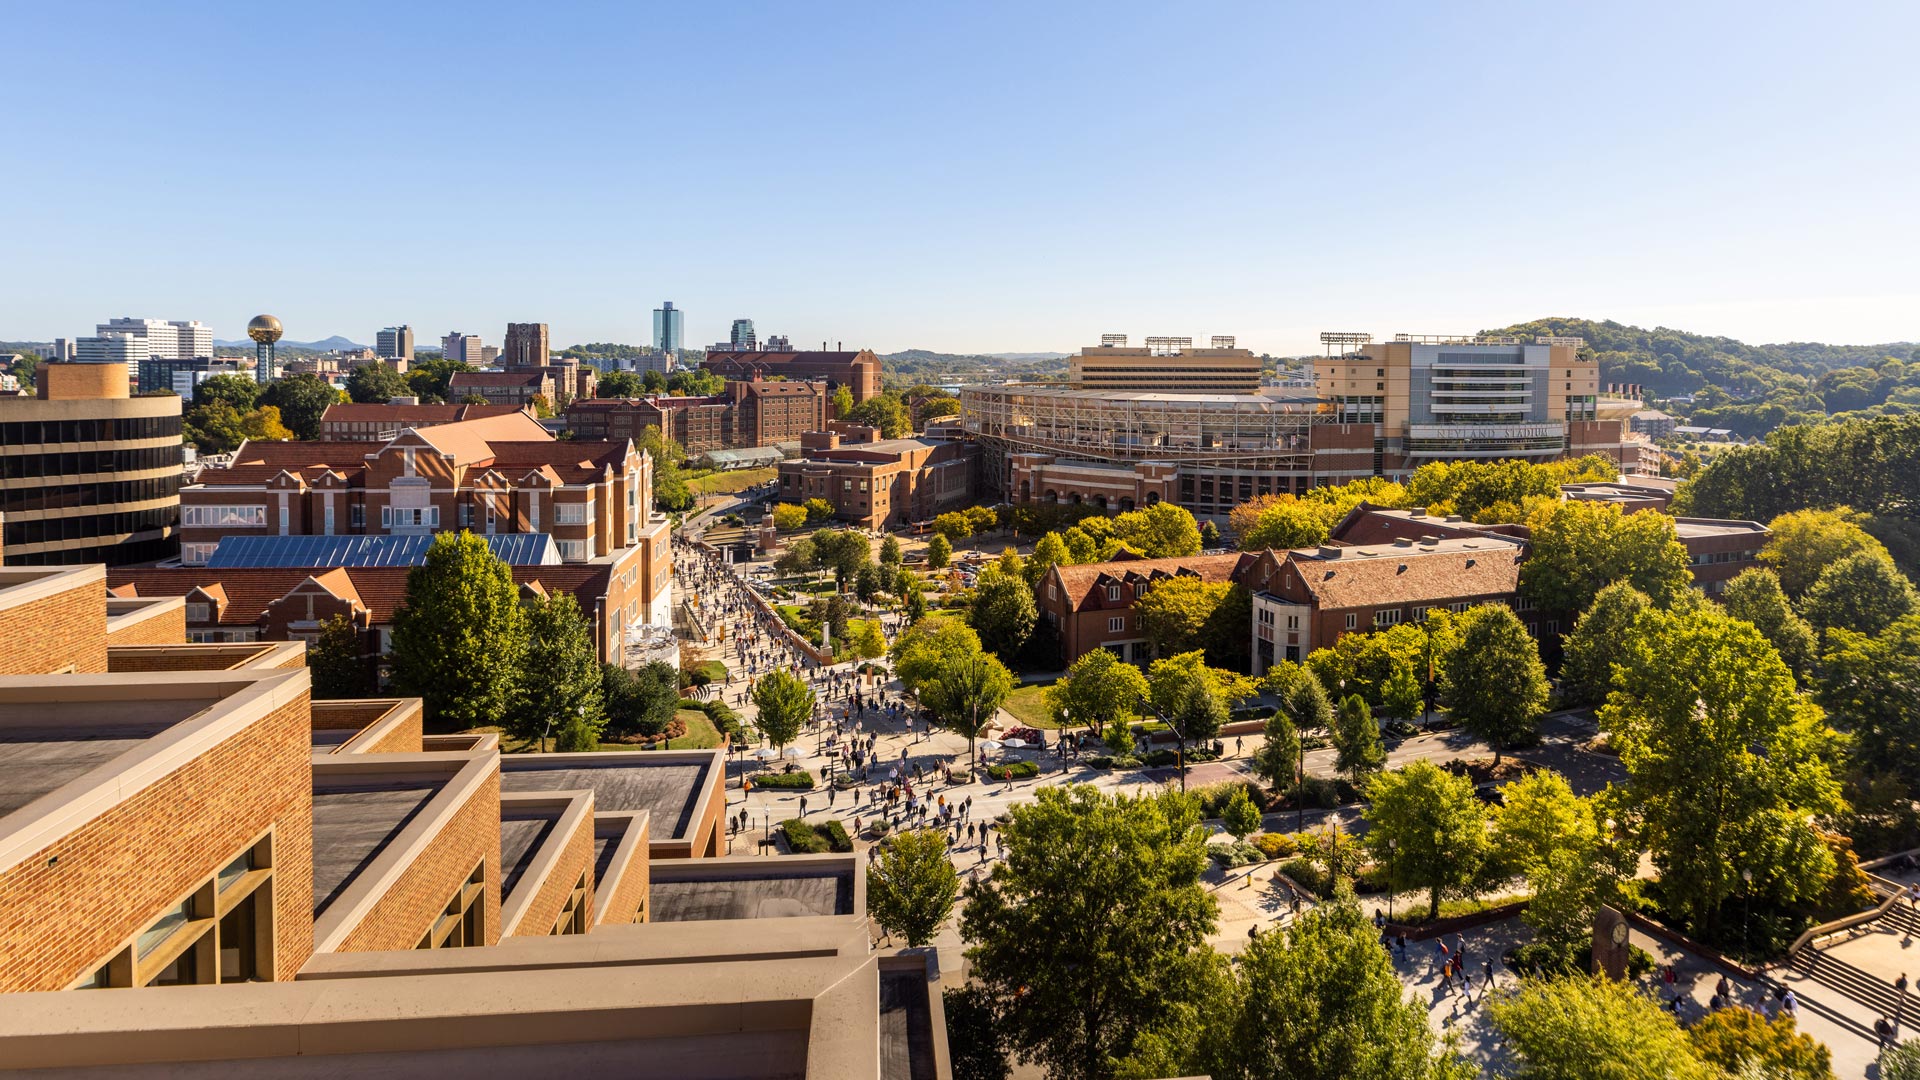 Bird's eye view of University of Tennessee, Knoxville campus.